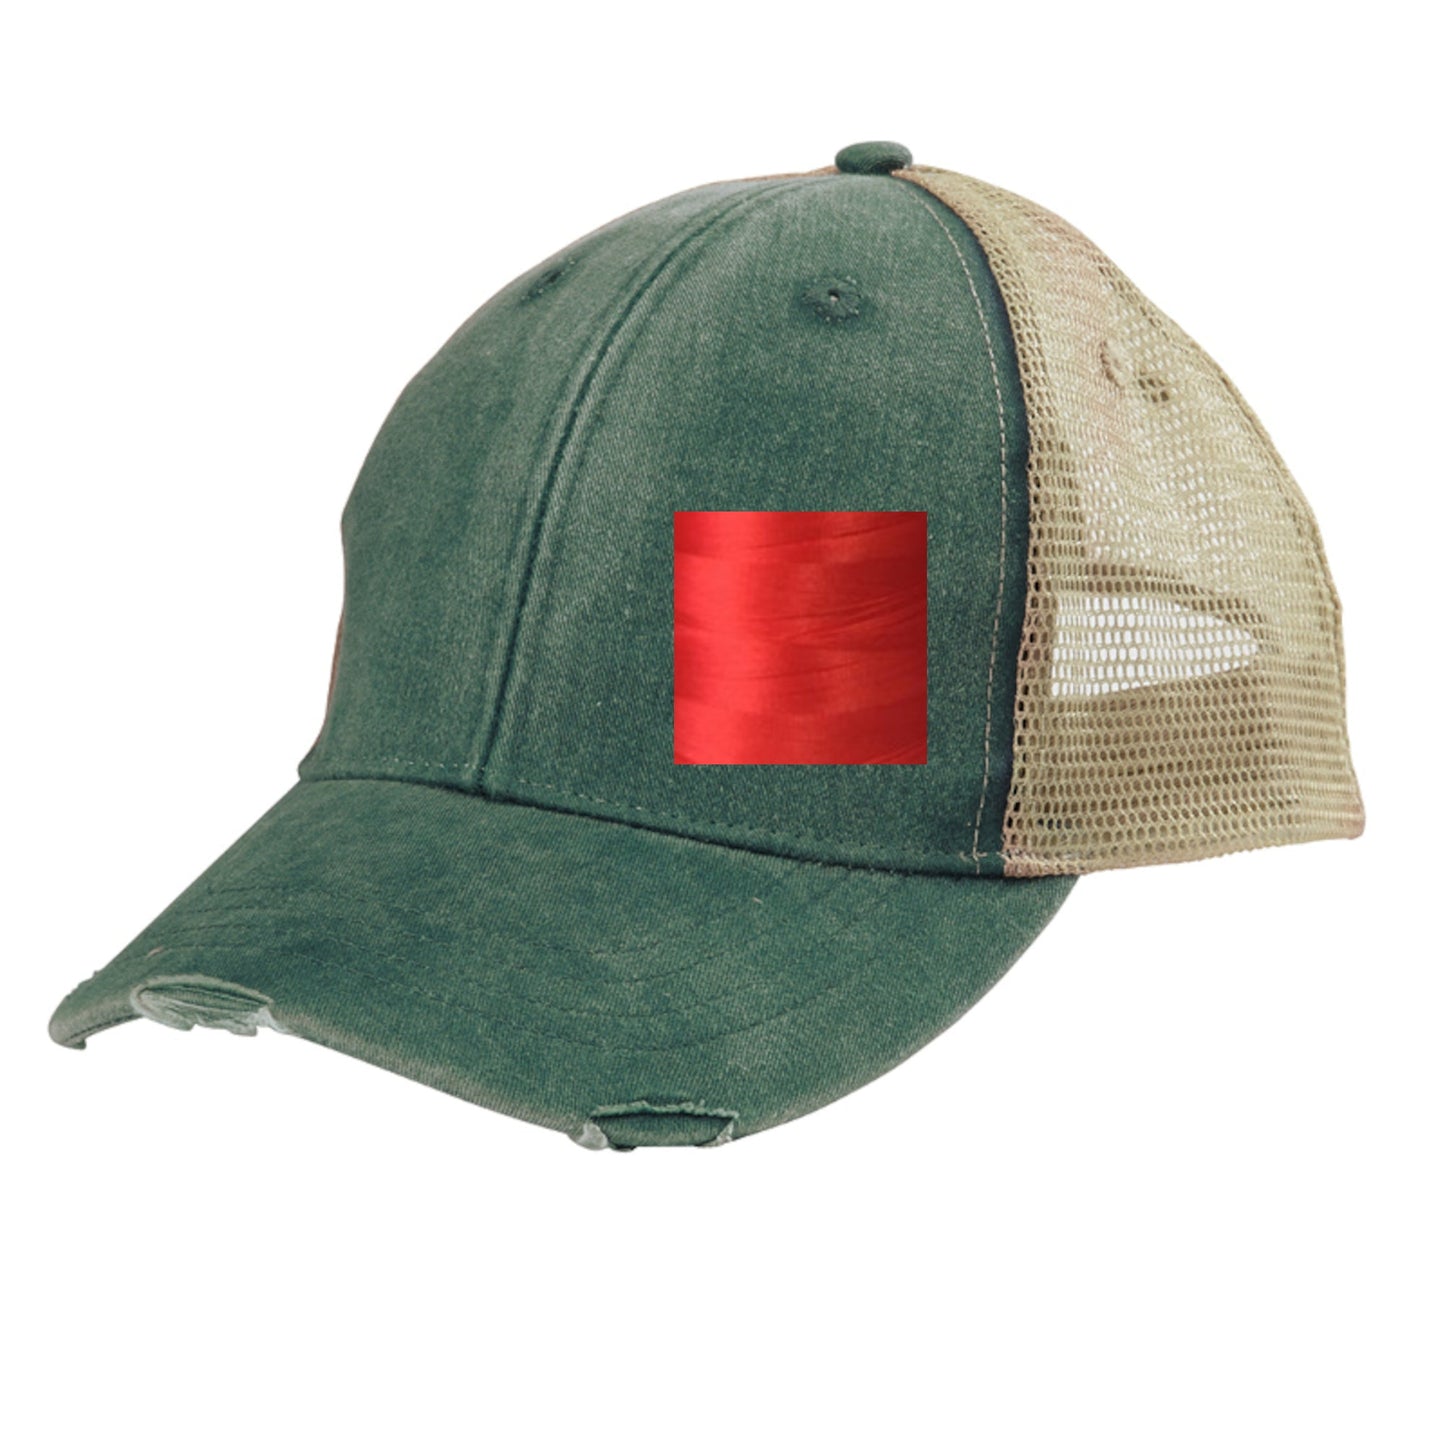 Hawaii Hat | Distressed Snapback Trucker |  state cap | many color choices